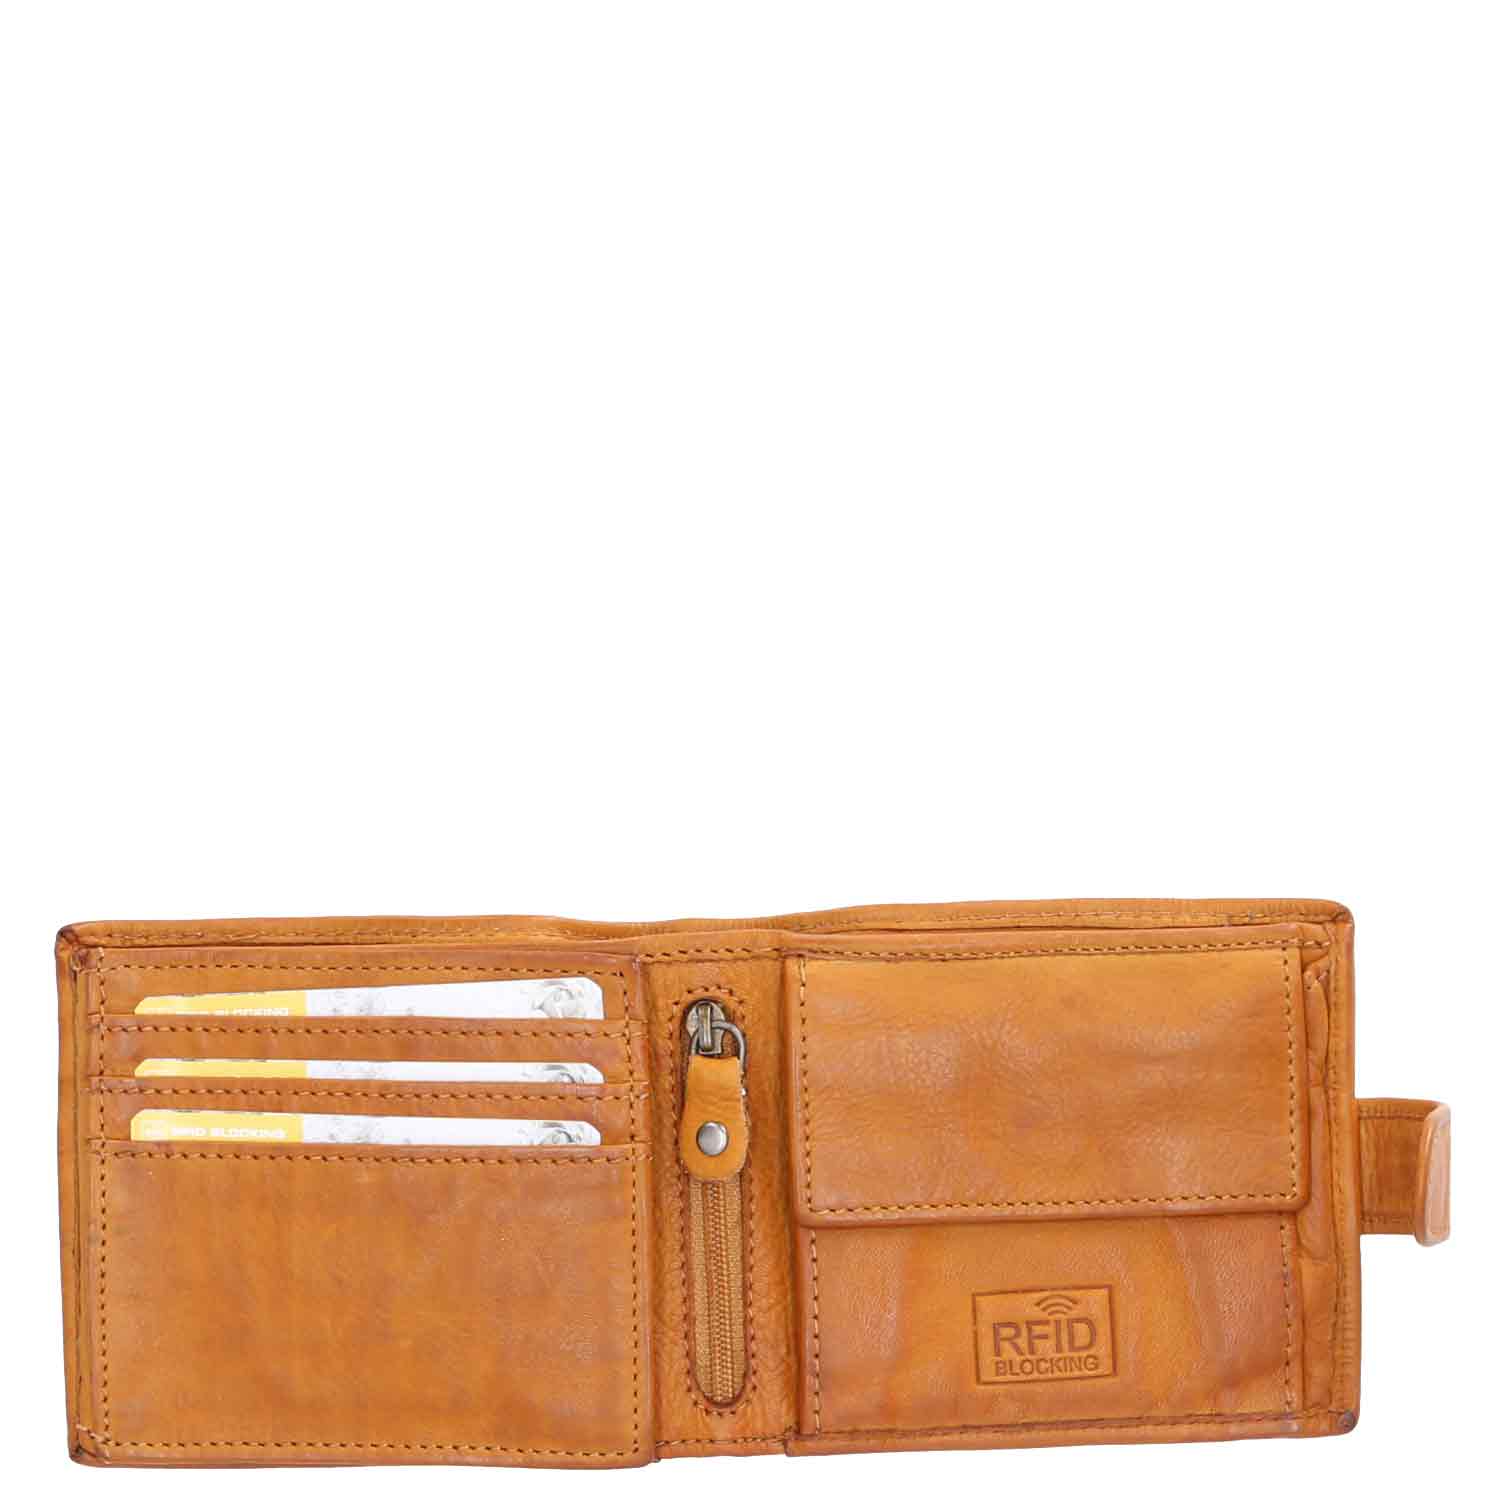 The Skandinavian Brand Mens Wallet square washed leather Cognac